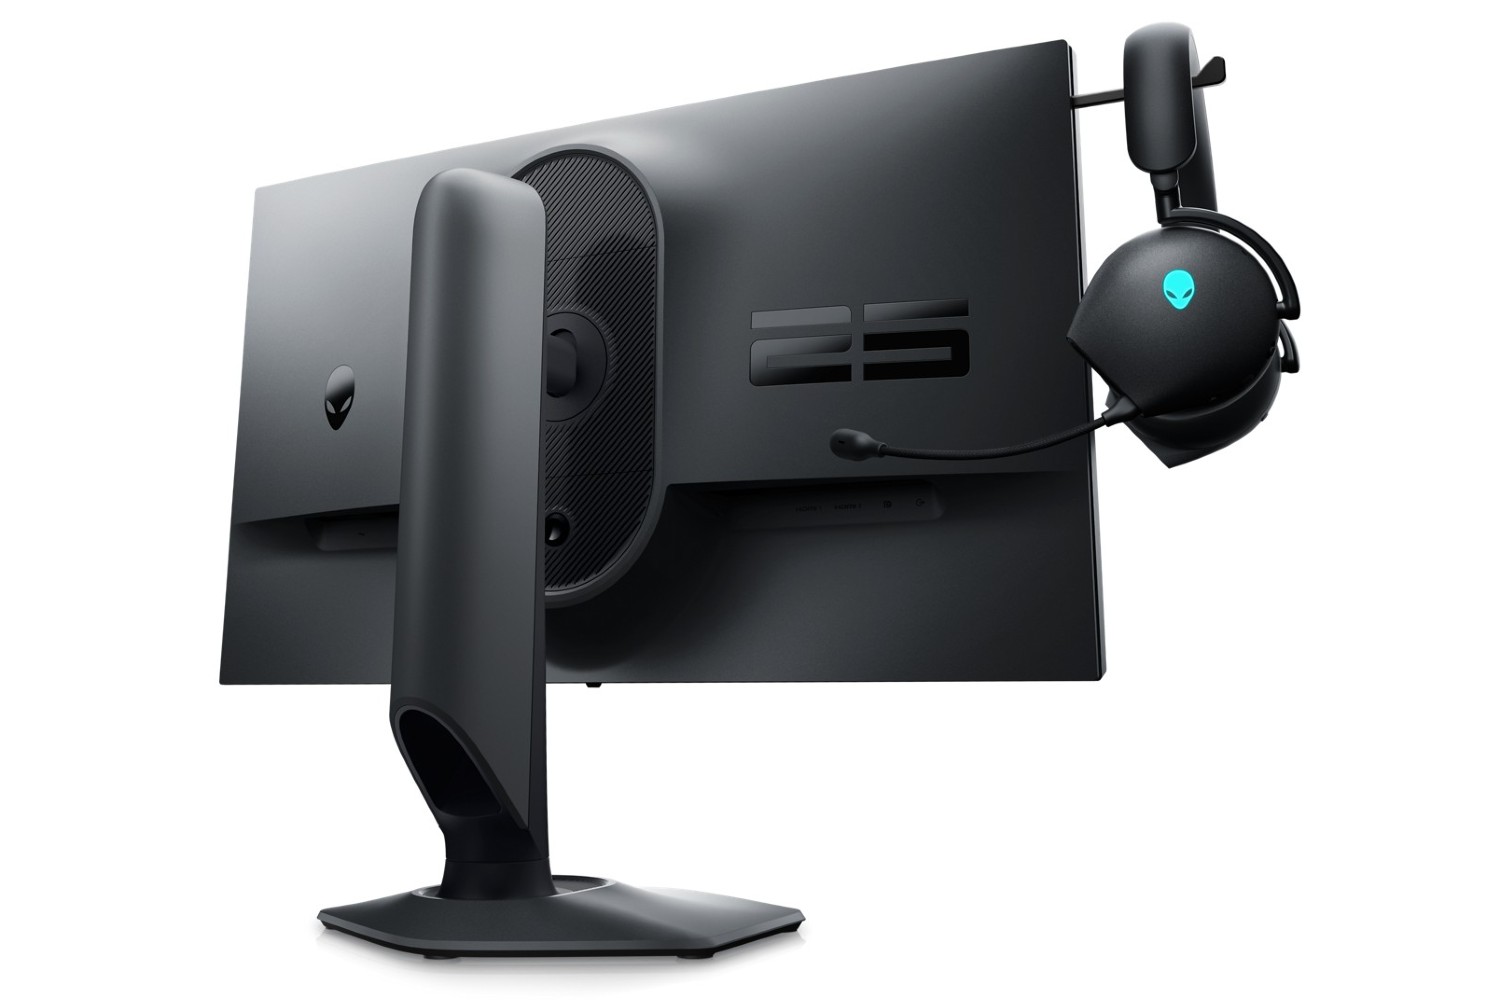 Alienware's Latest Gaming Monitor Hits 360Hz, Rocks Retractable